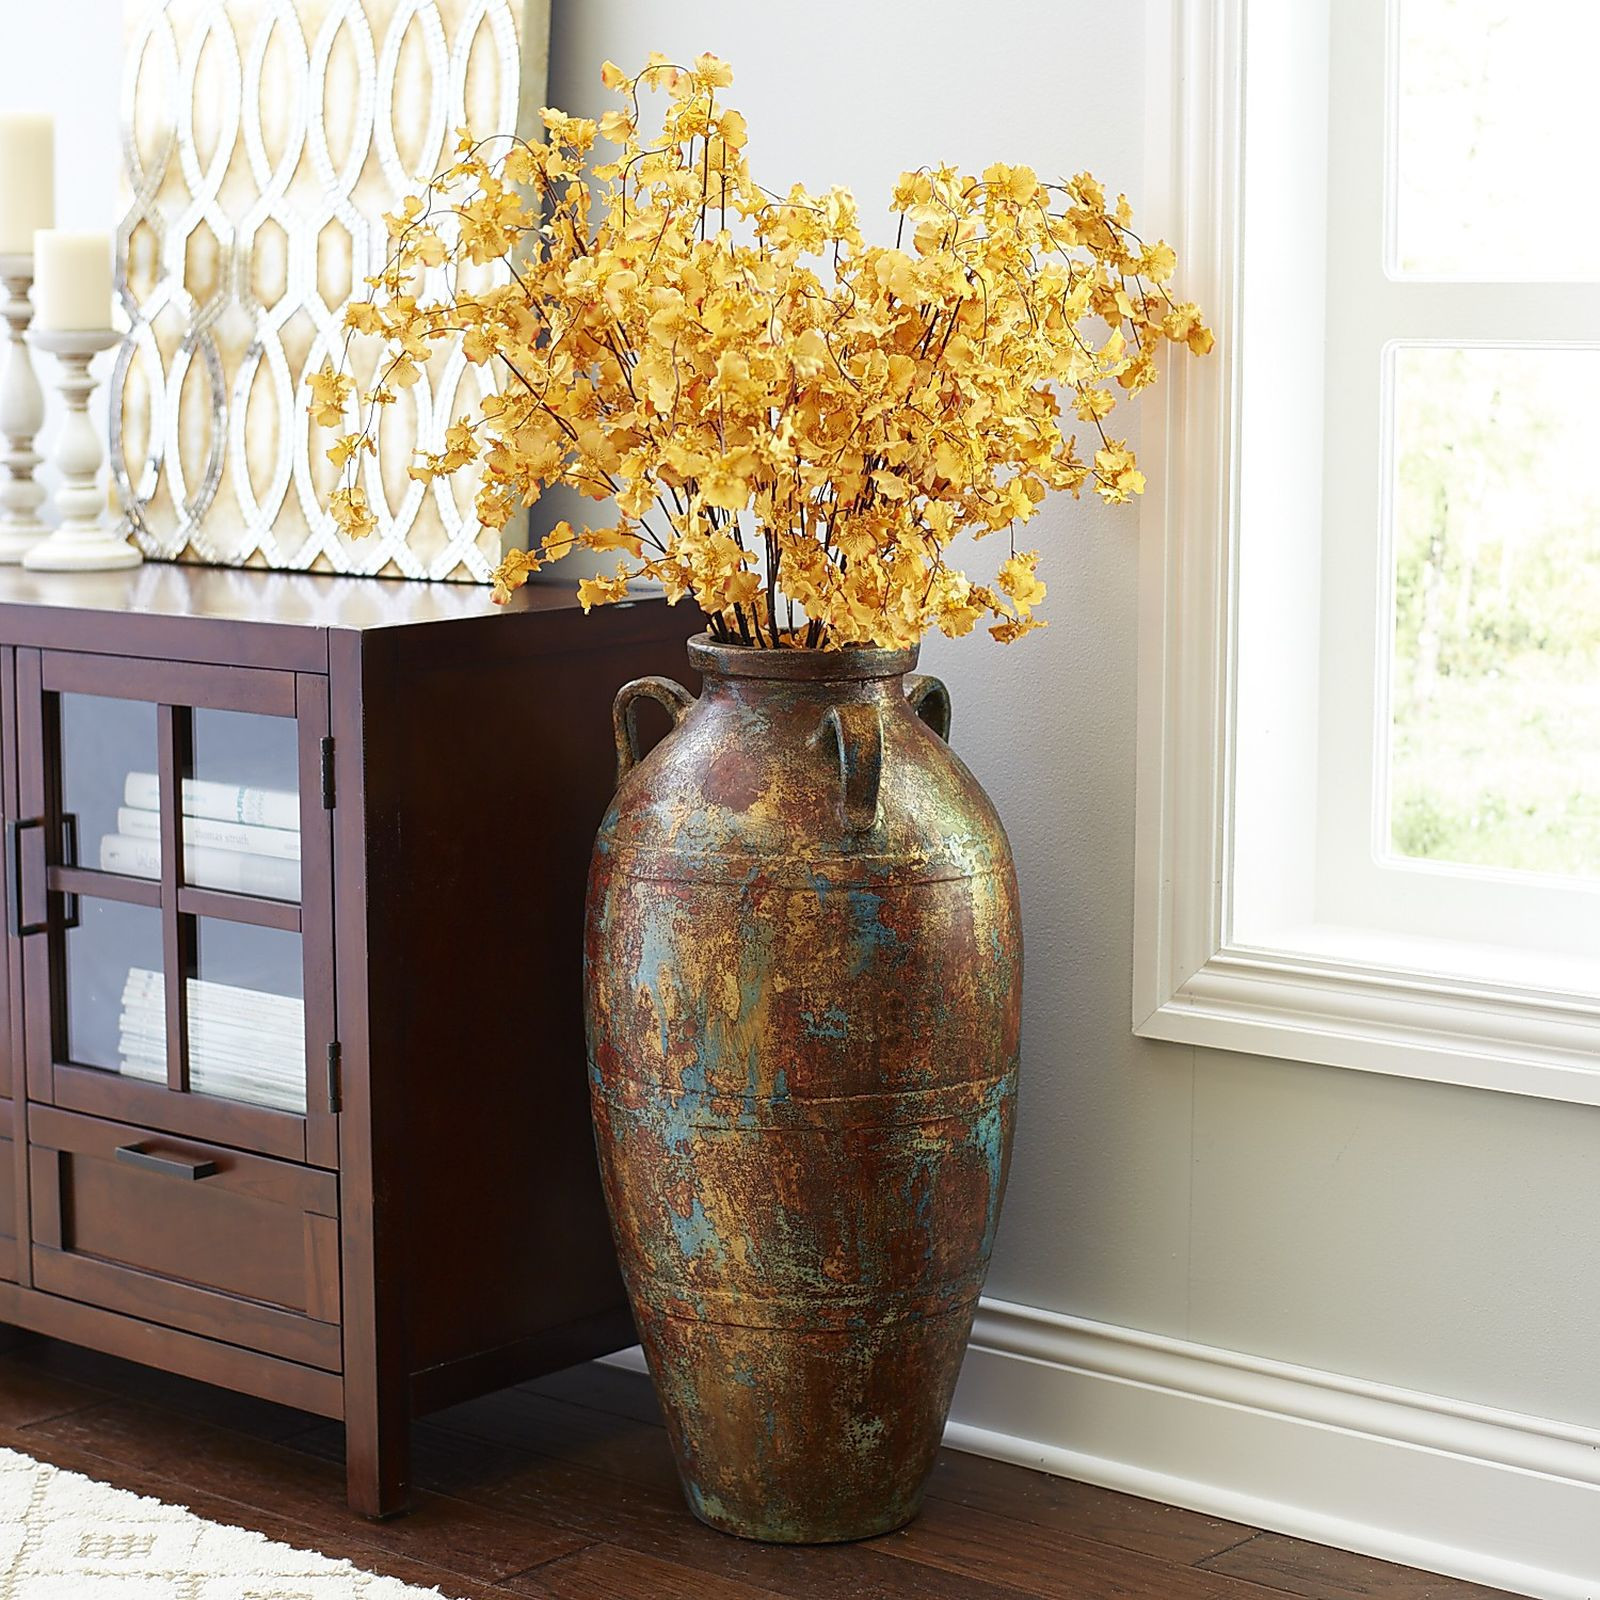 27 Wonderful Clay Floor Vase 2024 free download clay floor vase of tall mirrored floor vase mirror ideas throughout terracotta floor vase ideas of large vases for living room extra